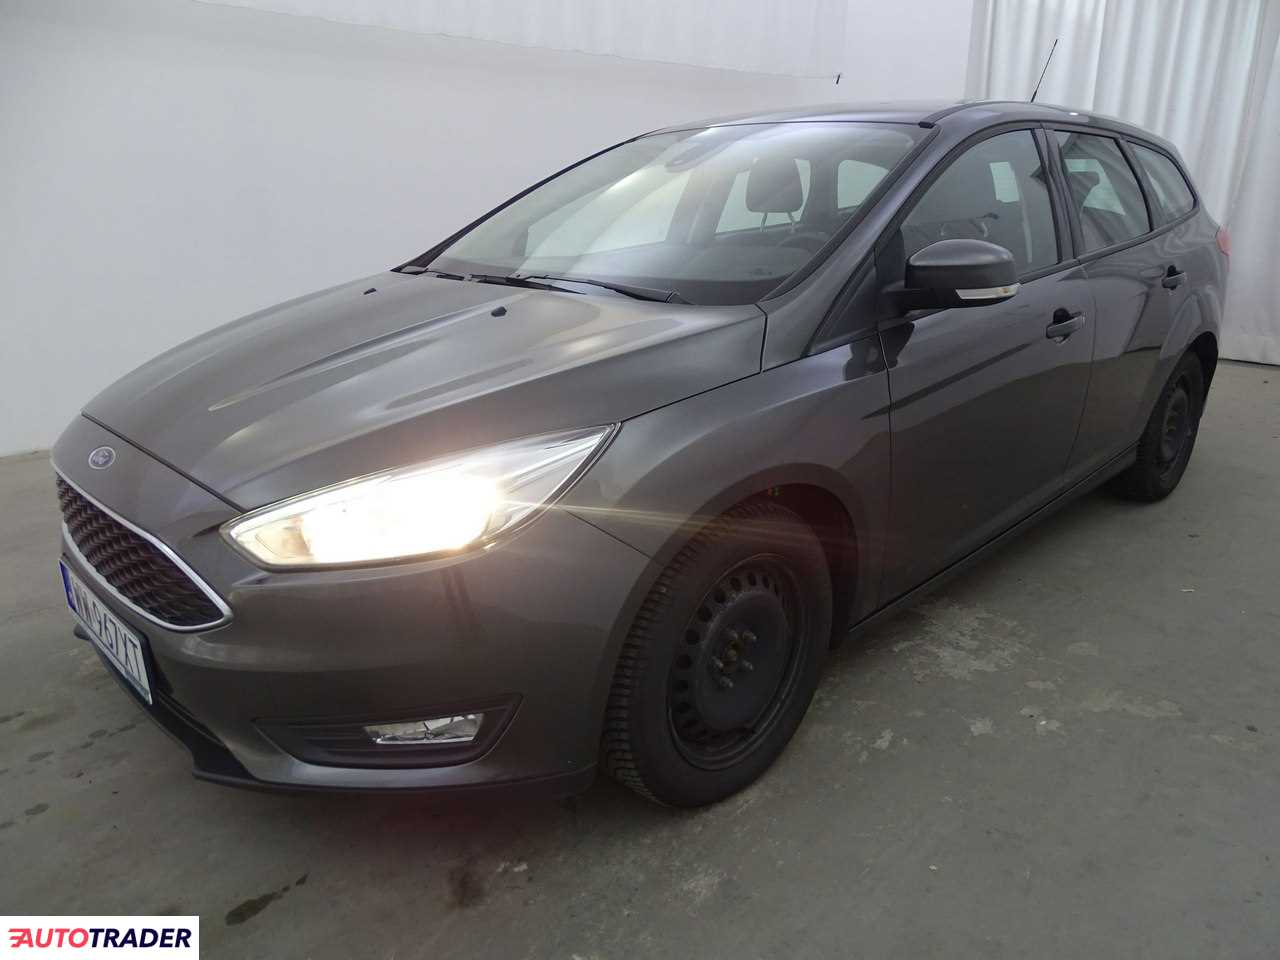 Ford Focus 2017 1.5 119 KM